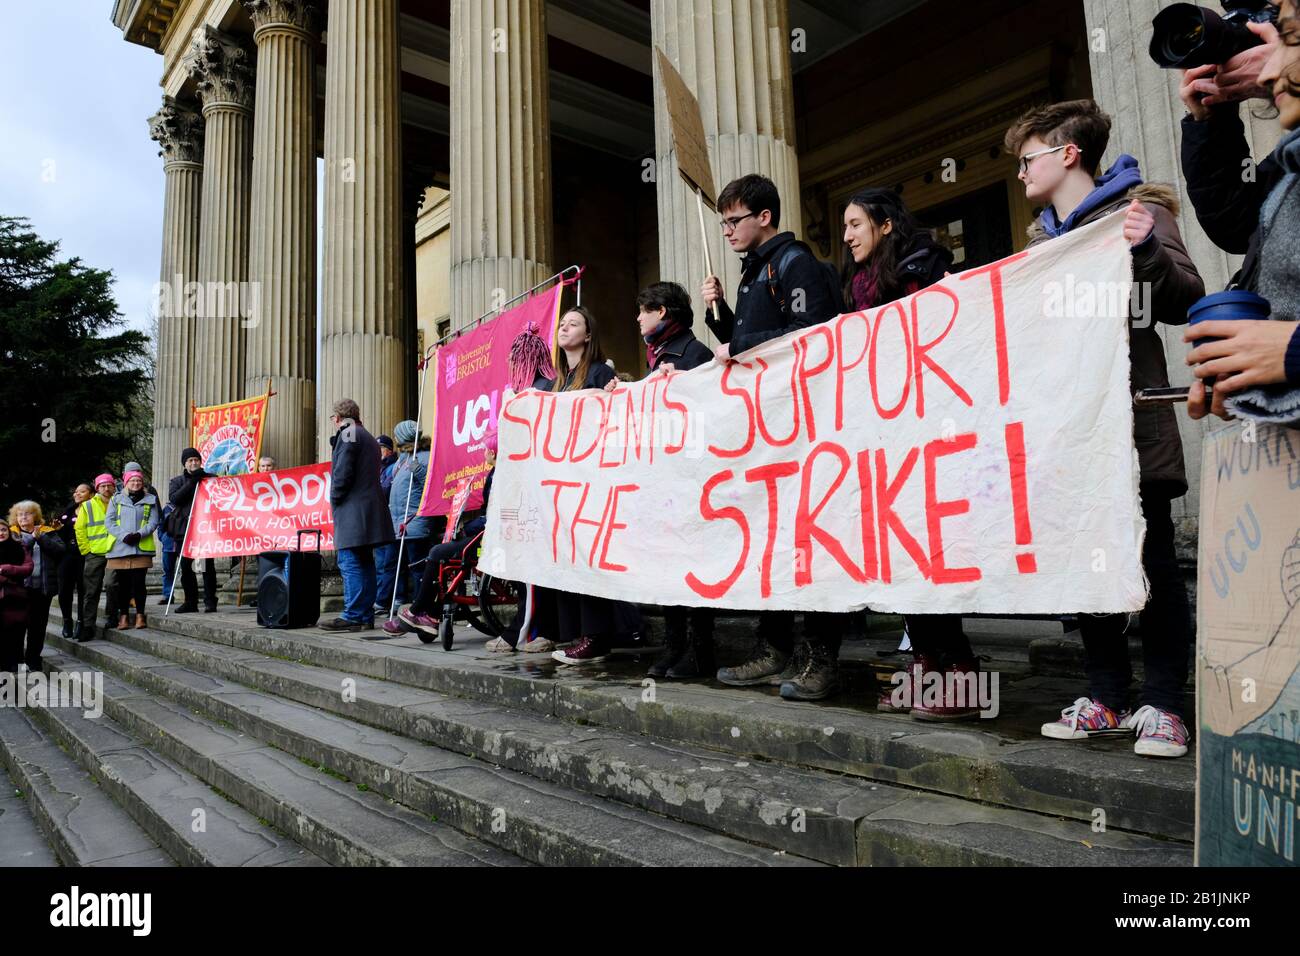 Bristol, UK. 26th Feb, 2020. The University and College Union (UCU) lecturer strike was supported by students and other local groups. University lecturers have commenced a series of strikes protesting changes to their Pension Scheme and working conditions. A group gathered outside the Victoria Rooms, and after speeches and protests the rally passed peacefully down Park Street and dispersed on College Green. Credit: Mr Standfast/Alamy Live News Stock Photo